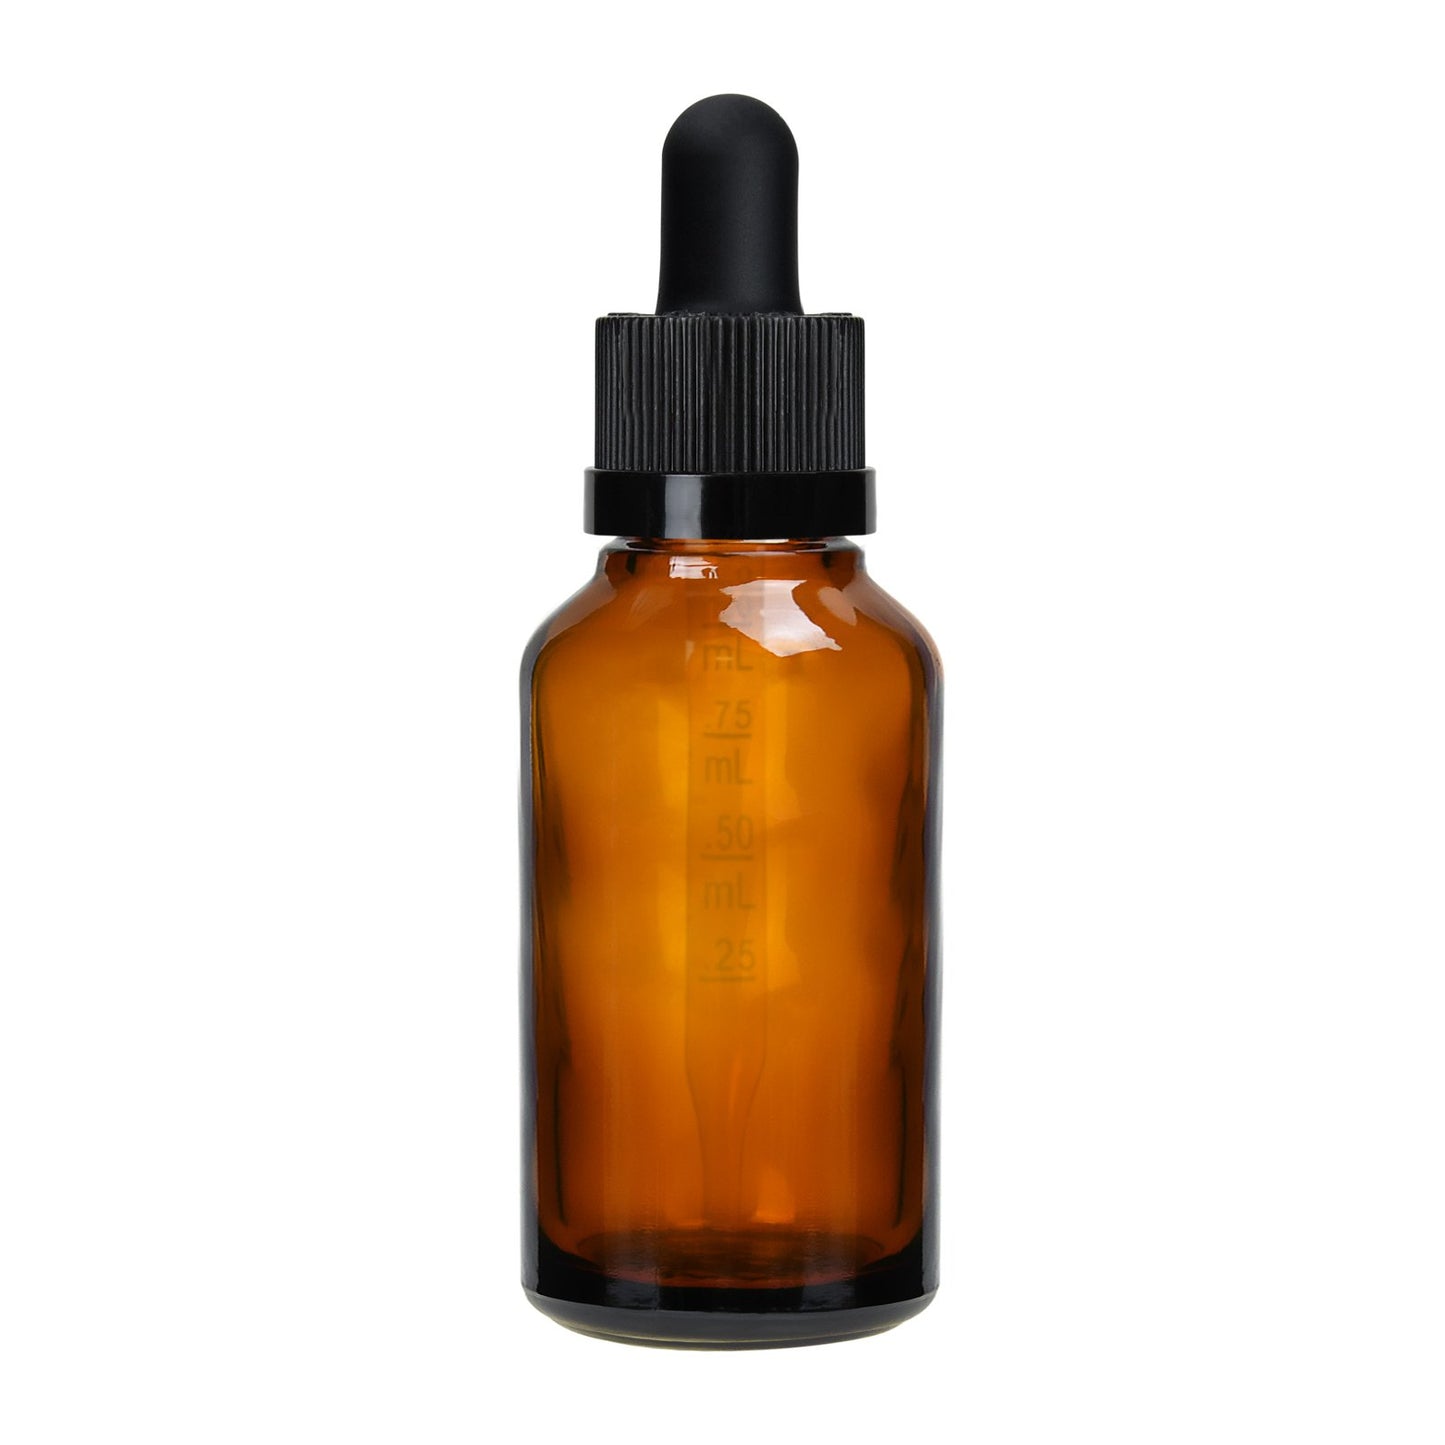 30ML / 1OZ Amber Glass Tincture Dropper Bottles 110 COUNT